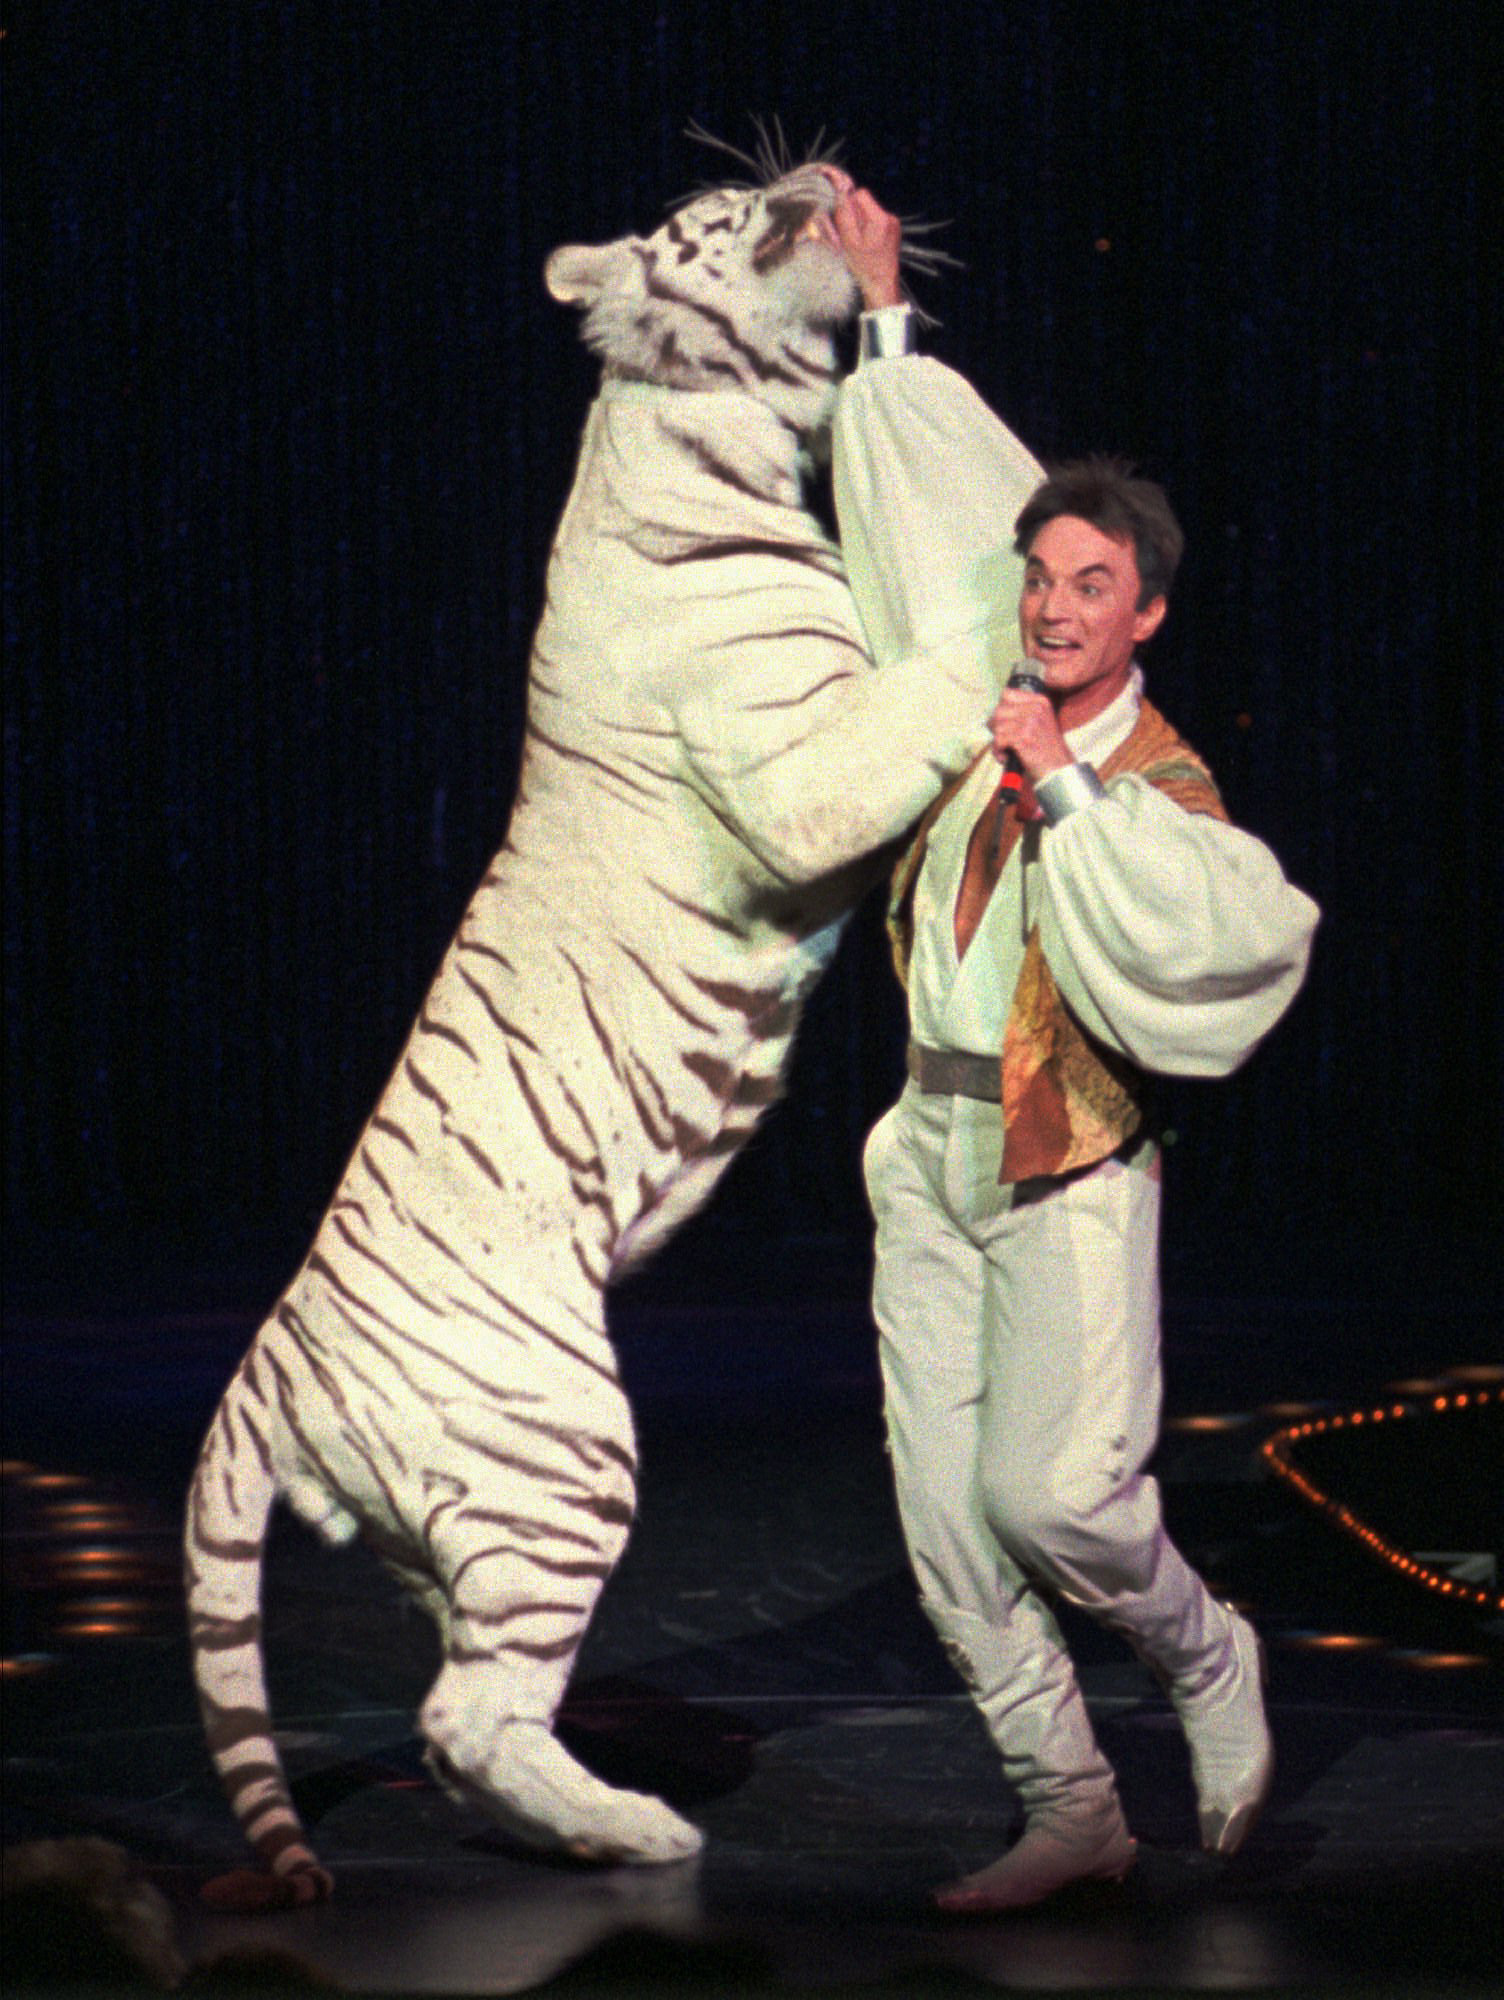 In 2003 a 7 year old white tiger named Montecore attacked performer Roy Horn of Siegfried and Roy during a performance on the Las Vegas strip. The attack left him with a brain injury that led to a stroke, and as a result Roy is partially paralyzed. After the brain injury, the tiger grabbed Roy in what he describes as a manner in which a tiger would pick up her cub, and dragged him off to the side of the stage. It is then that one of the tiger's teeth knicked an artery in Roy's neck, causing massive blood loss. To this day, he does not blame the tiger for the attack and Montecore has since passed away from illnesses at age 17.